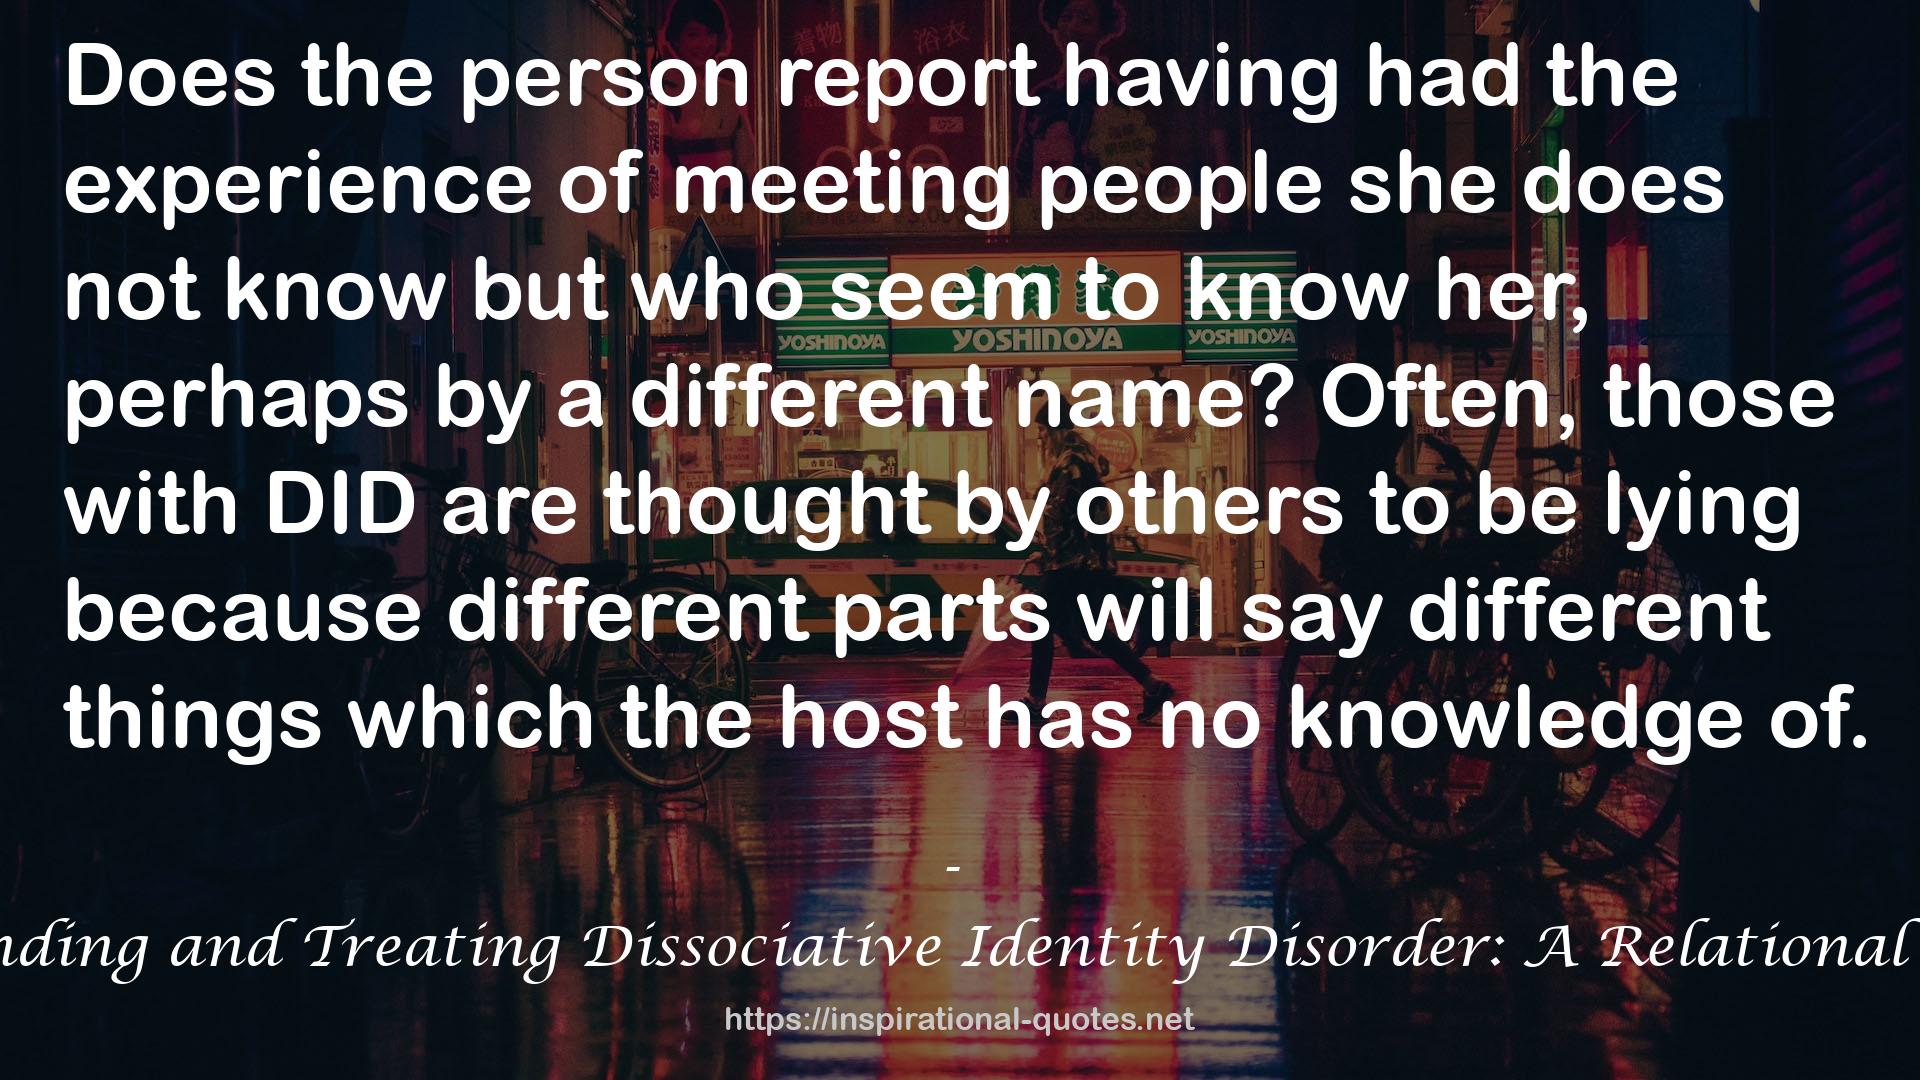 Understanding and Treating Dissociative Identity Disorder: A Relational Approach QUOTES